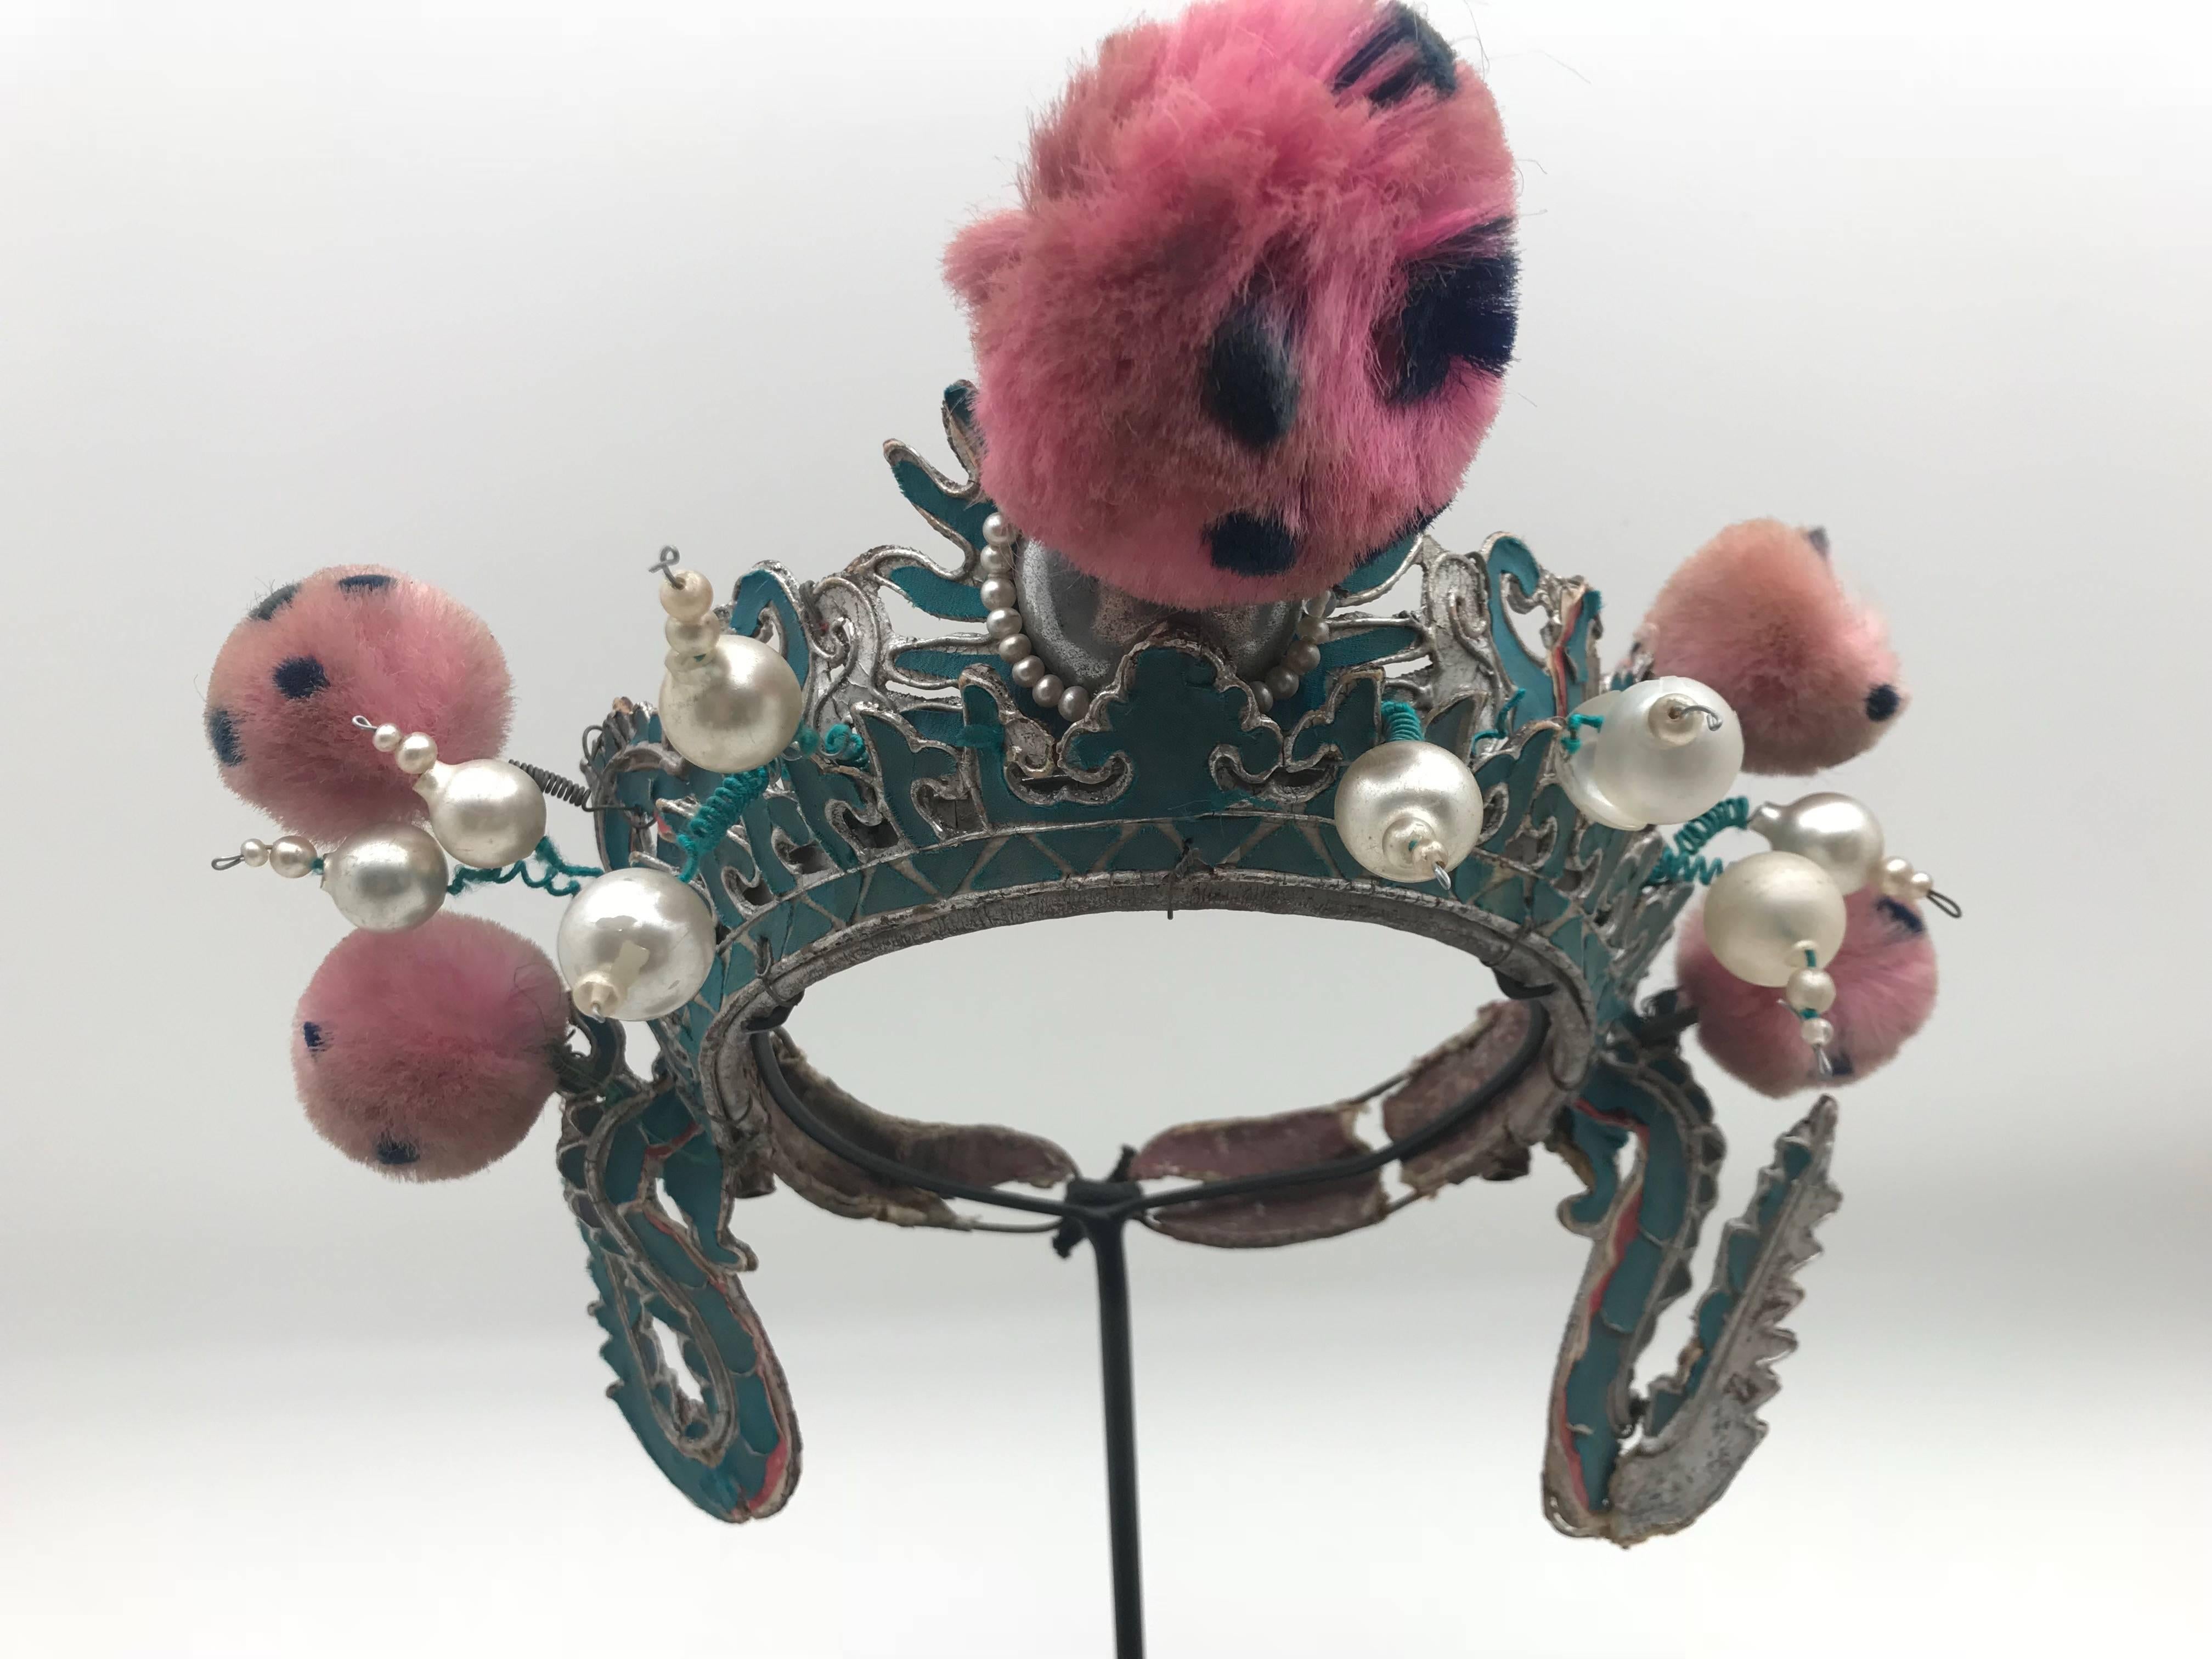 Vintage Chinese opera theatre headdress in turquoise and silver colors with pink and blue pom poms, early 20th century, mounted on a custom, black painted metal base.